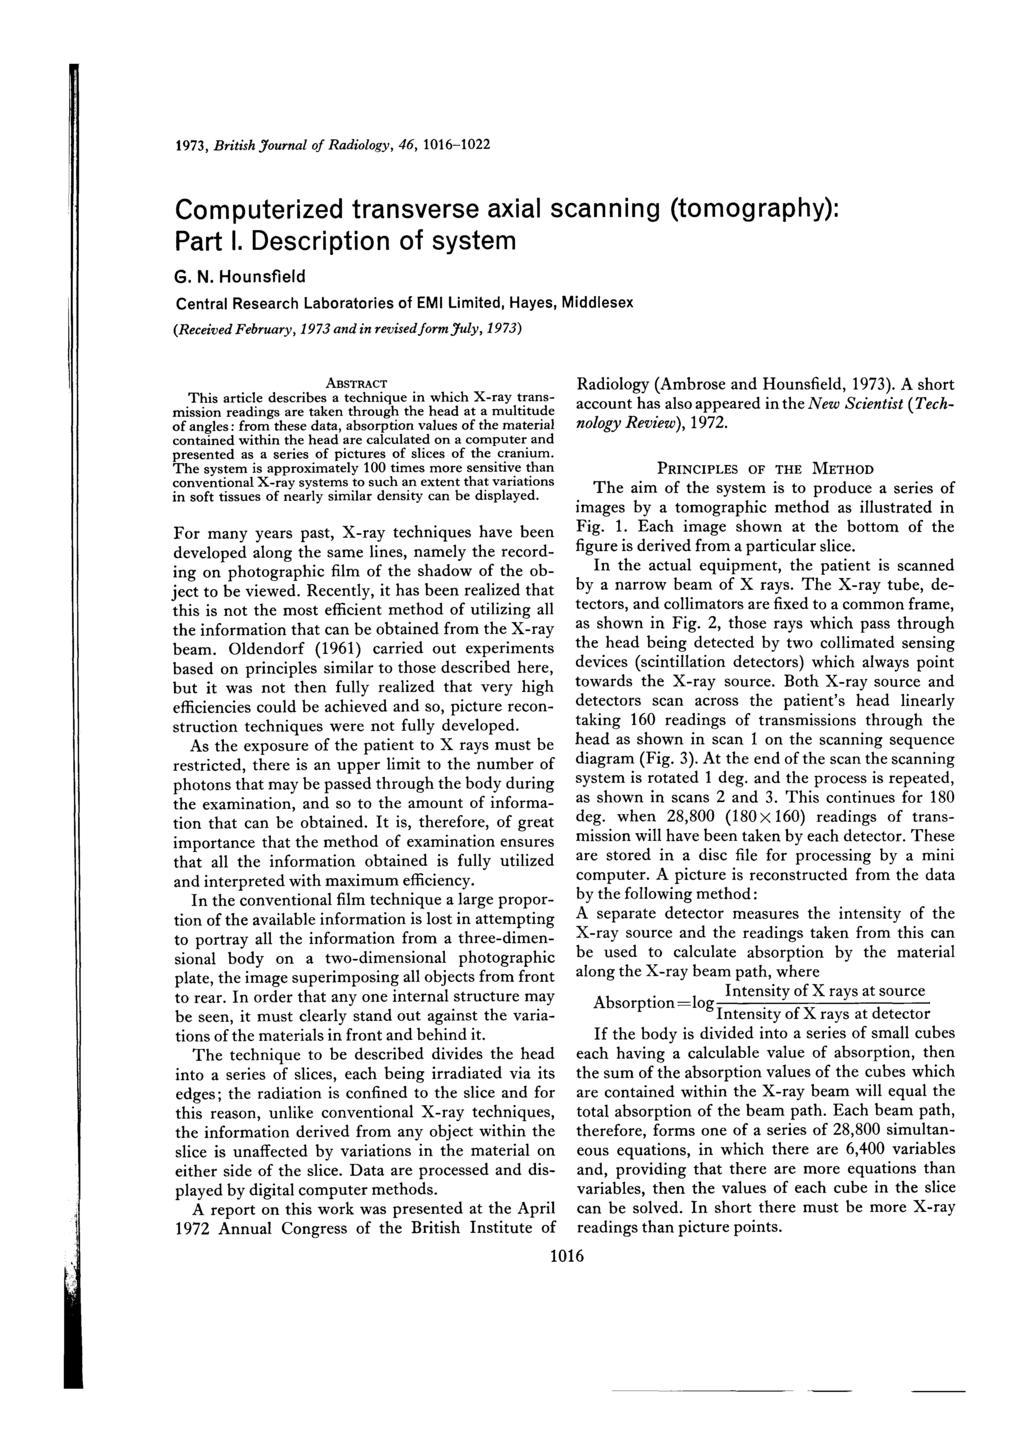 1973, British Journal of Radiology, 46, 1016-1022 Computerized transverse axial scanning (tomography): Part I.